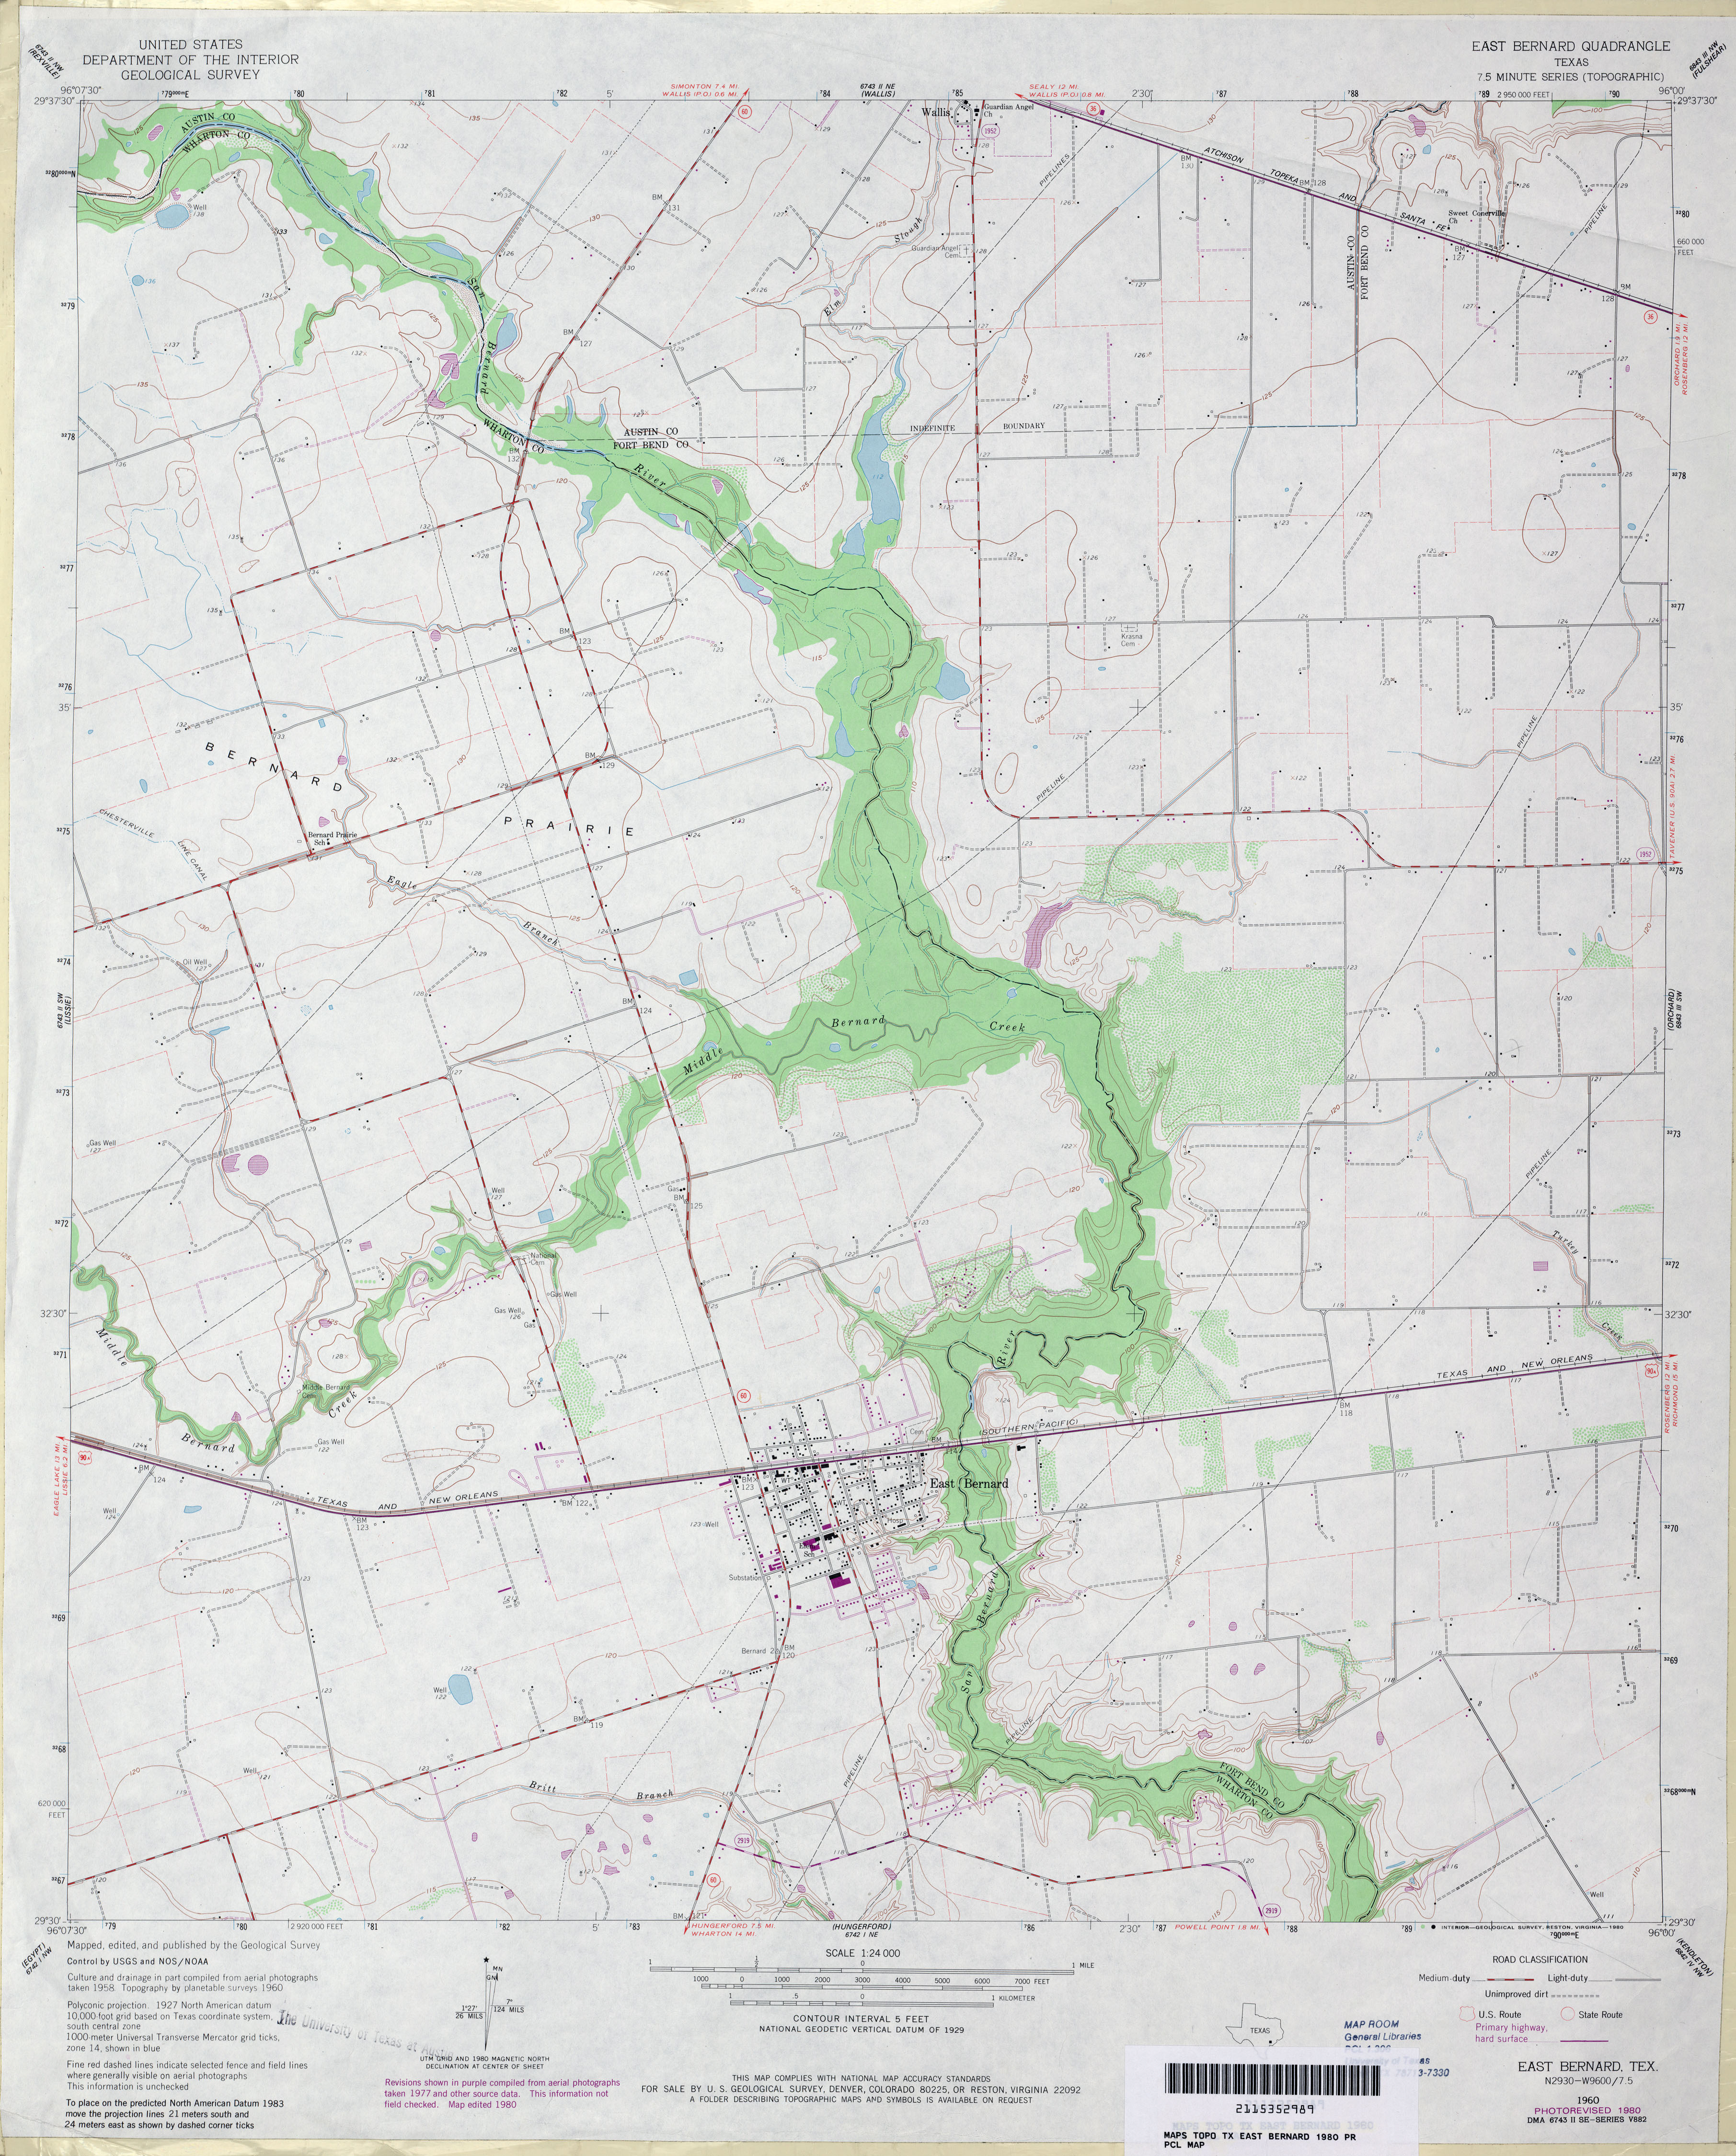 Texas Topographic Maps - Perry-Castañeda Map Collection - Ut Library - Topographic Map Of Fort Bend County Texas